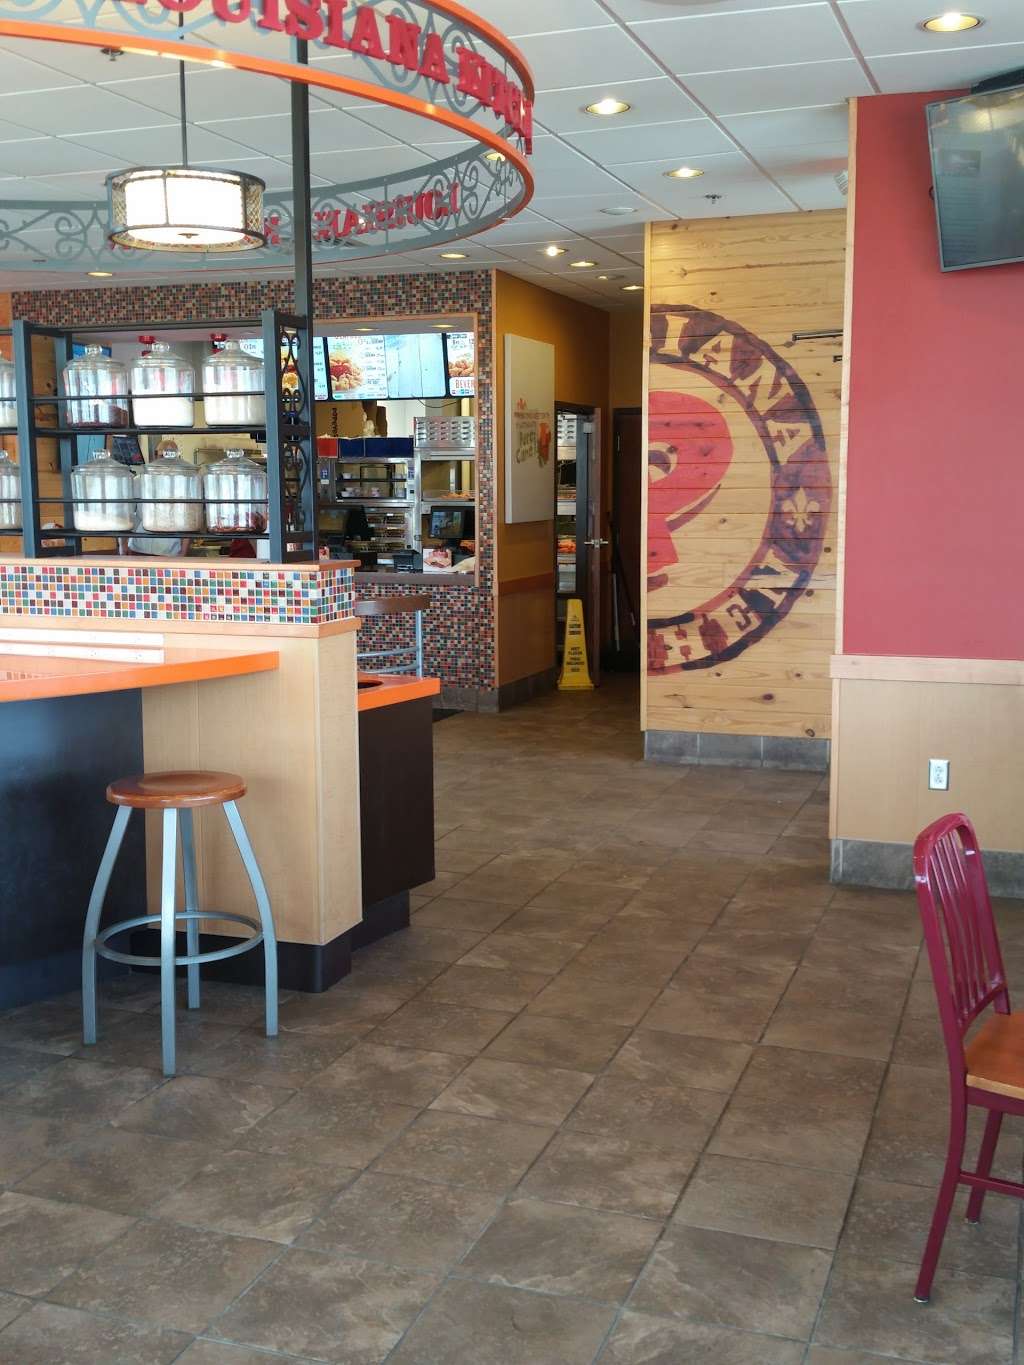 Popeyes Louisiana Kitchen | 5713 S Scatterfield Rd, Anderson, IN 46013, USA | Phone: (765) 622-4994